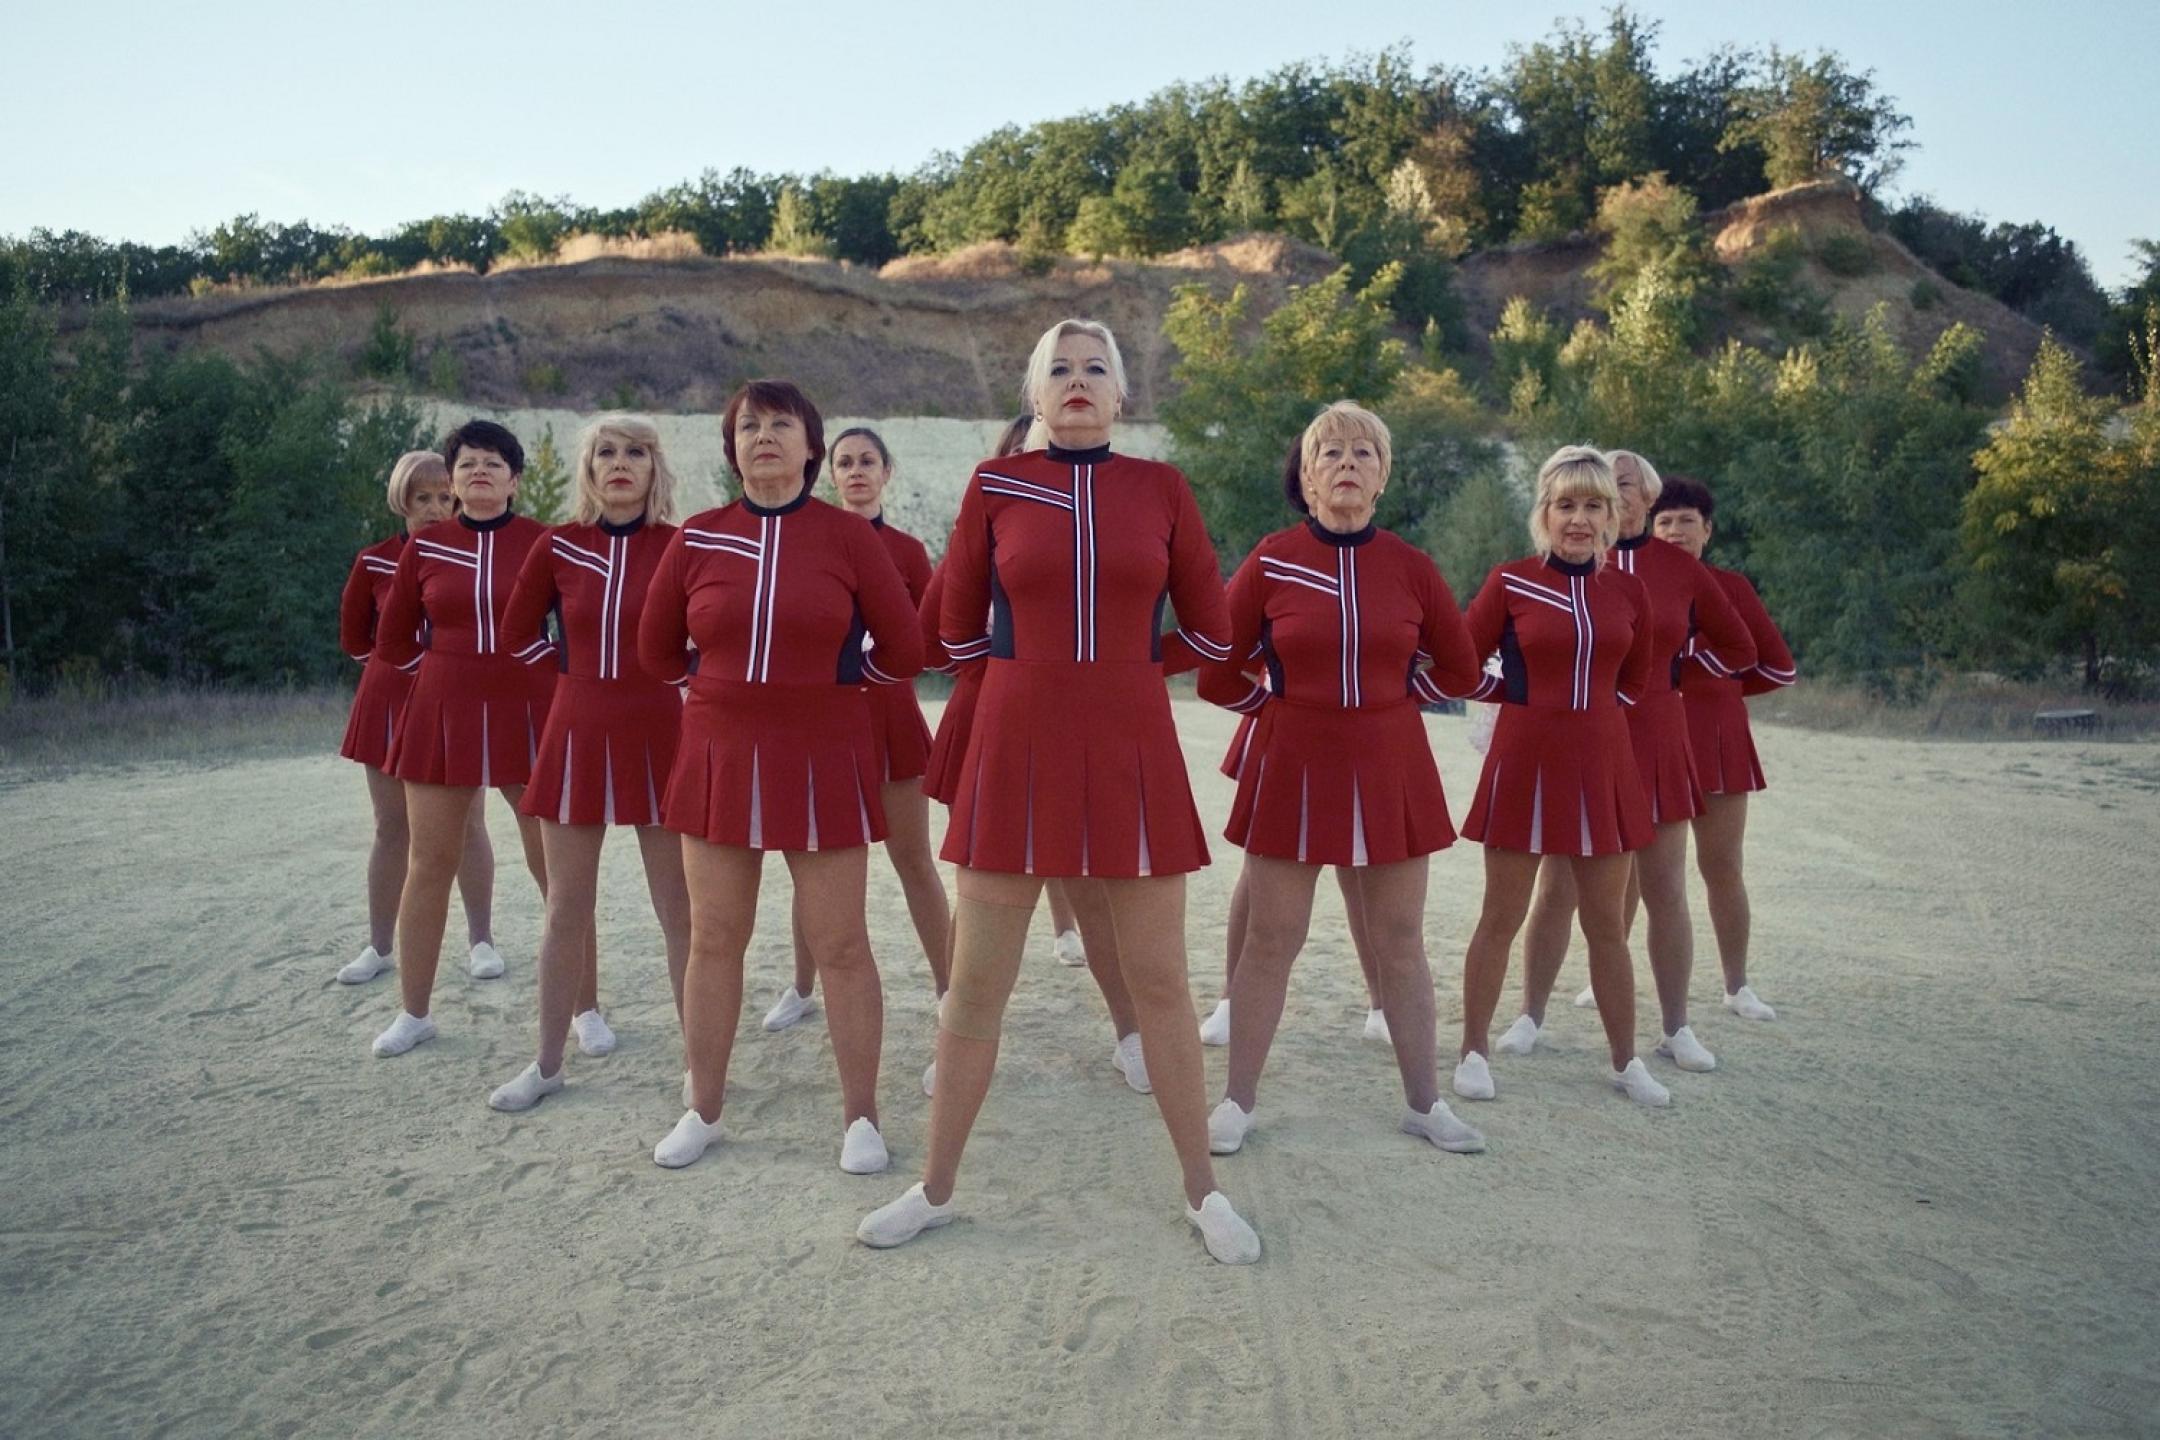 Eleven middle-aged women in read cheerleader uniforms are standing in position on a sandy field with their arms behind their backs and heads held high